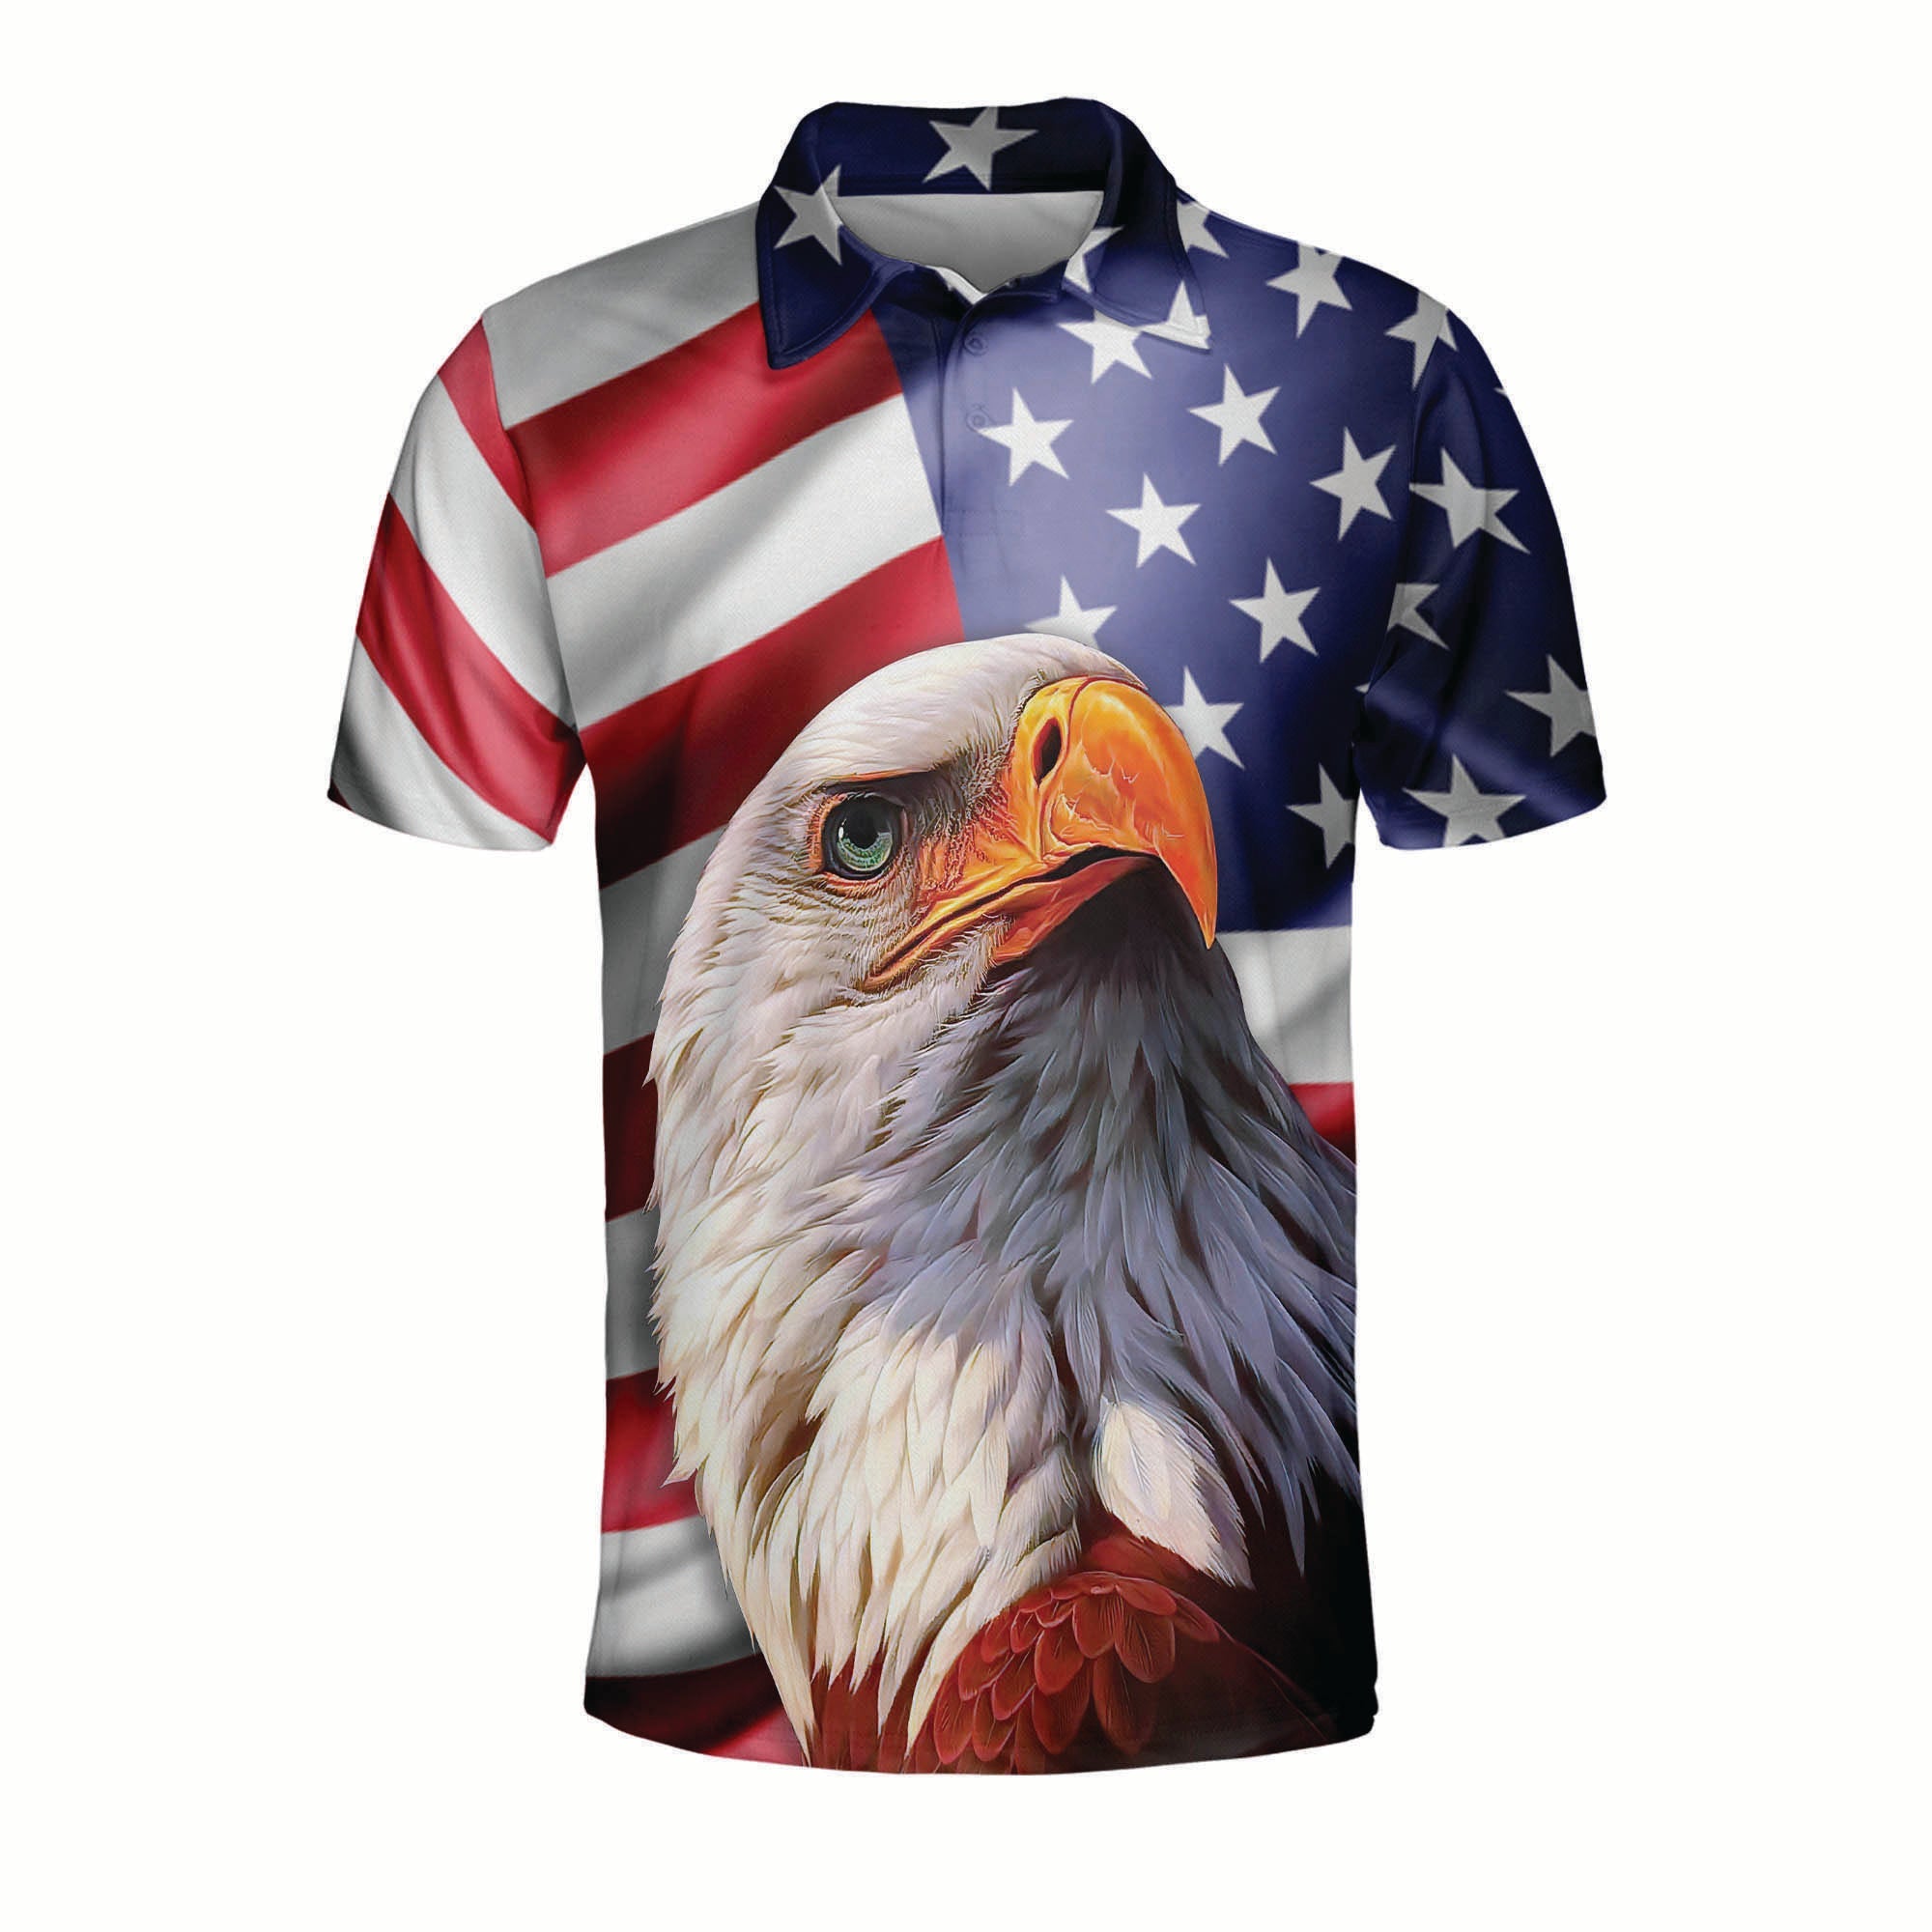 3D All Over Print Patriotic American Design With Eagle Polo Shirt/ Idea Shirt for Men in Independence Day